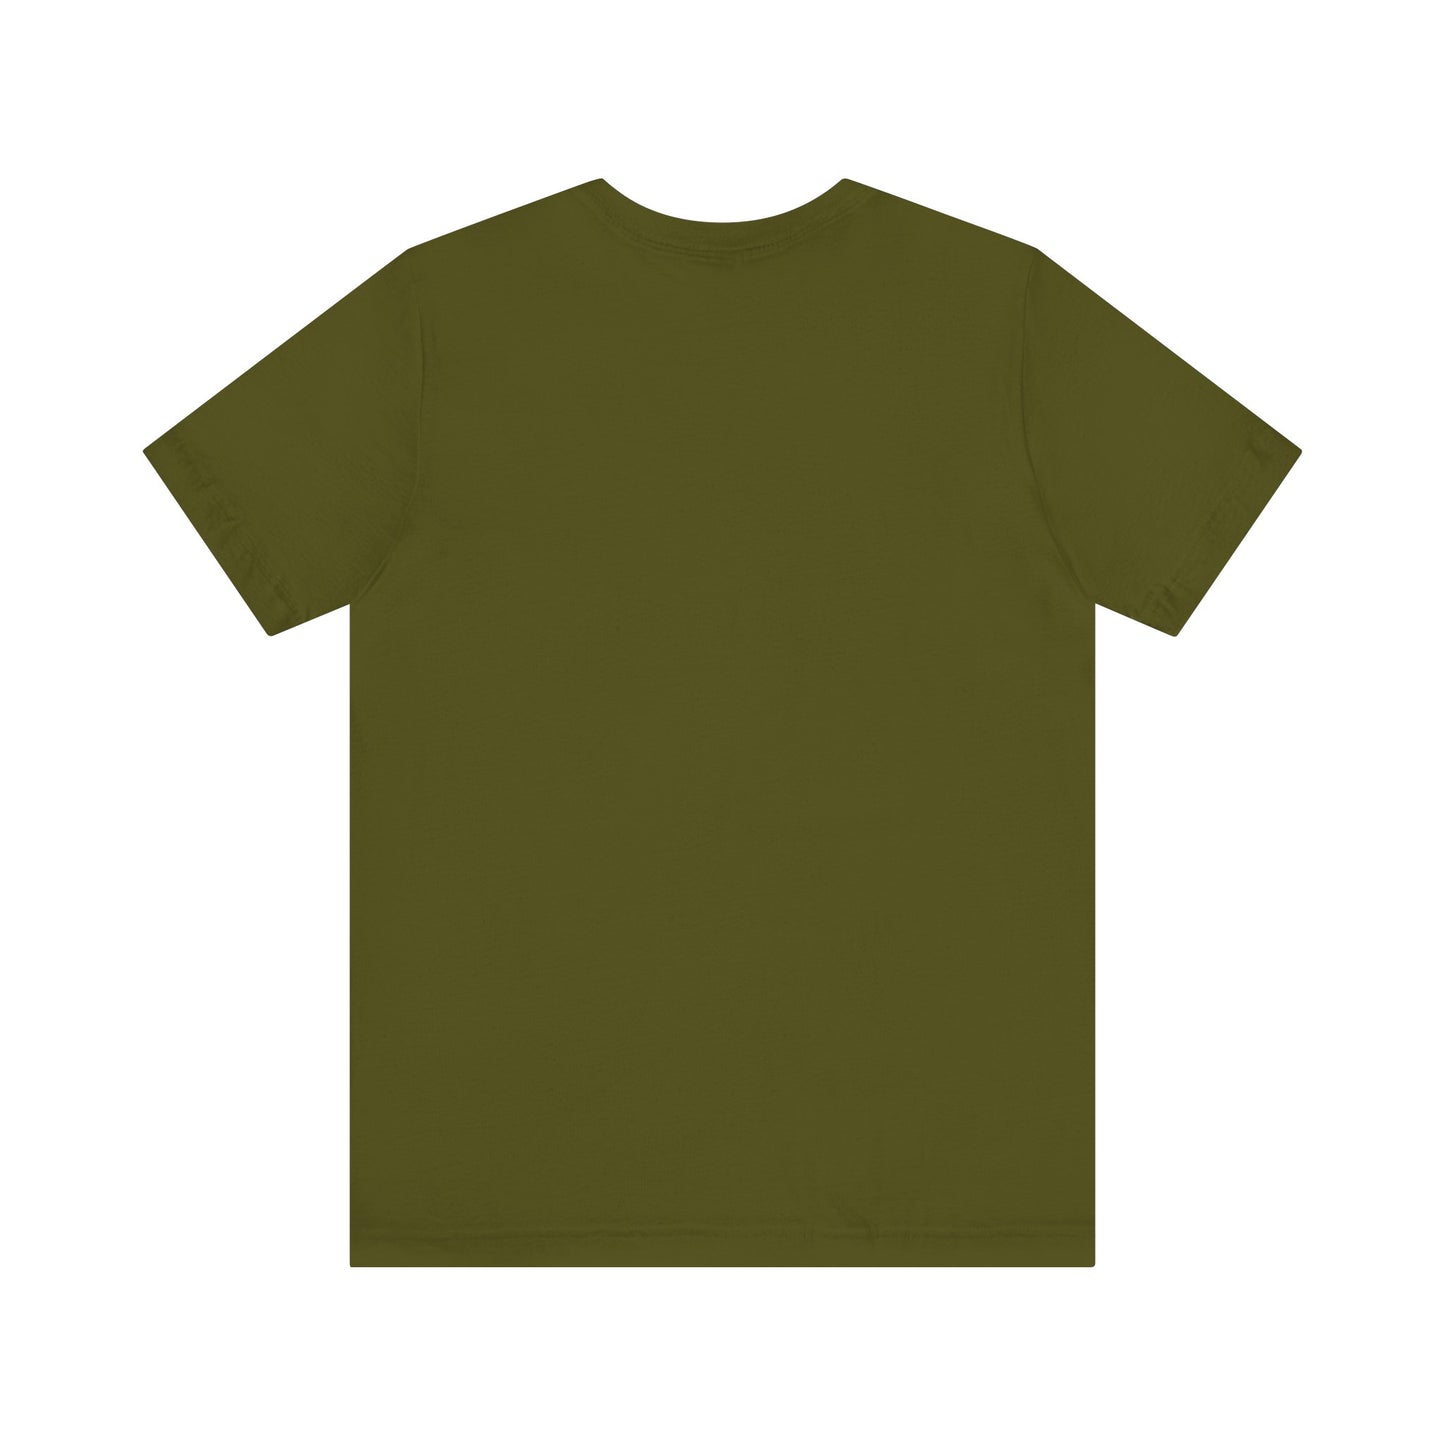 Olive Green - Unisex Jersey Short Sleeve T Shirt - Olive Green Royal T